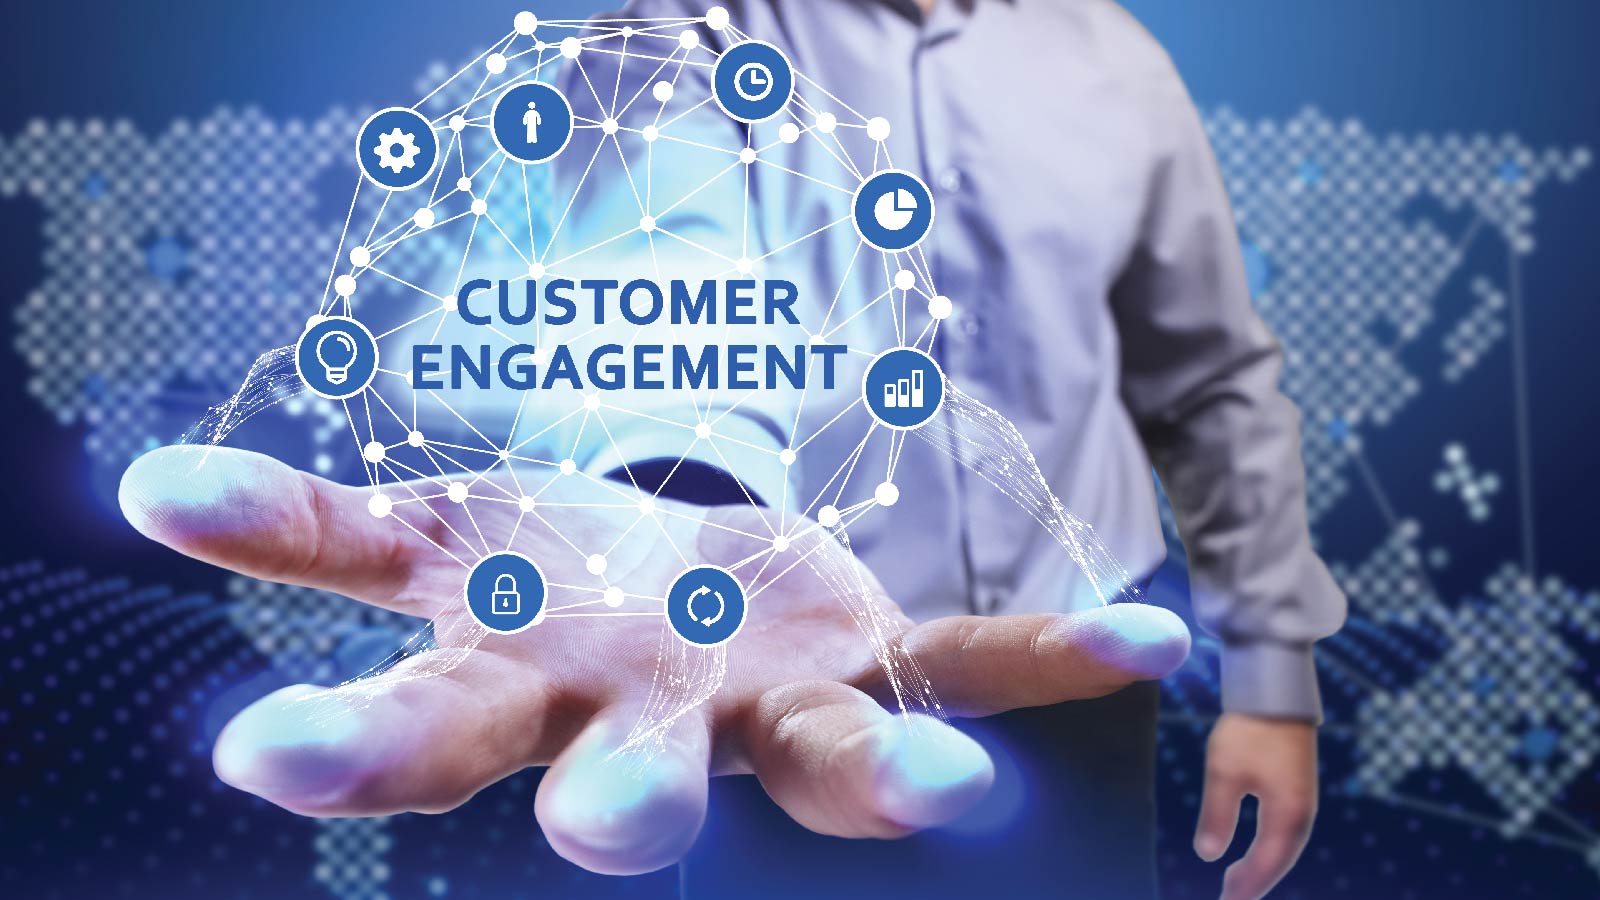 Increasing customer engagement in the post-COVID world